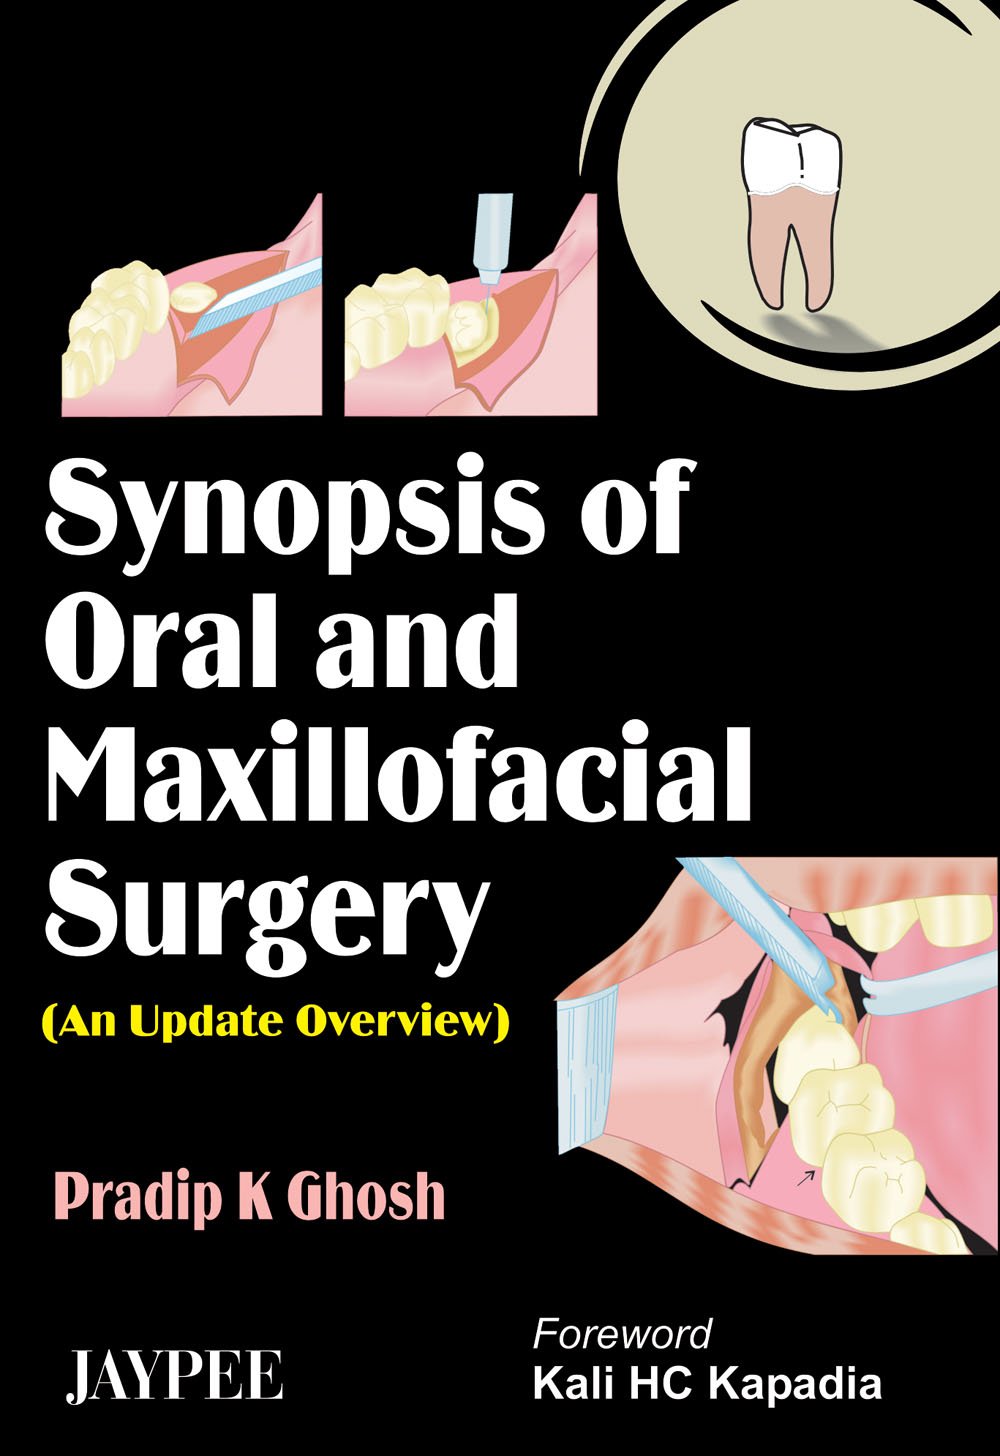 Synopsis Of Oral And Maxillofacial Surgery (An Update Overview)